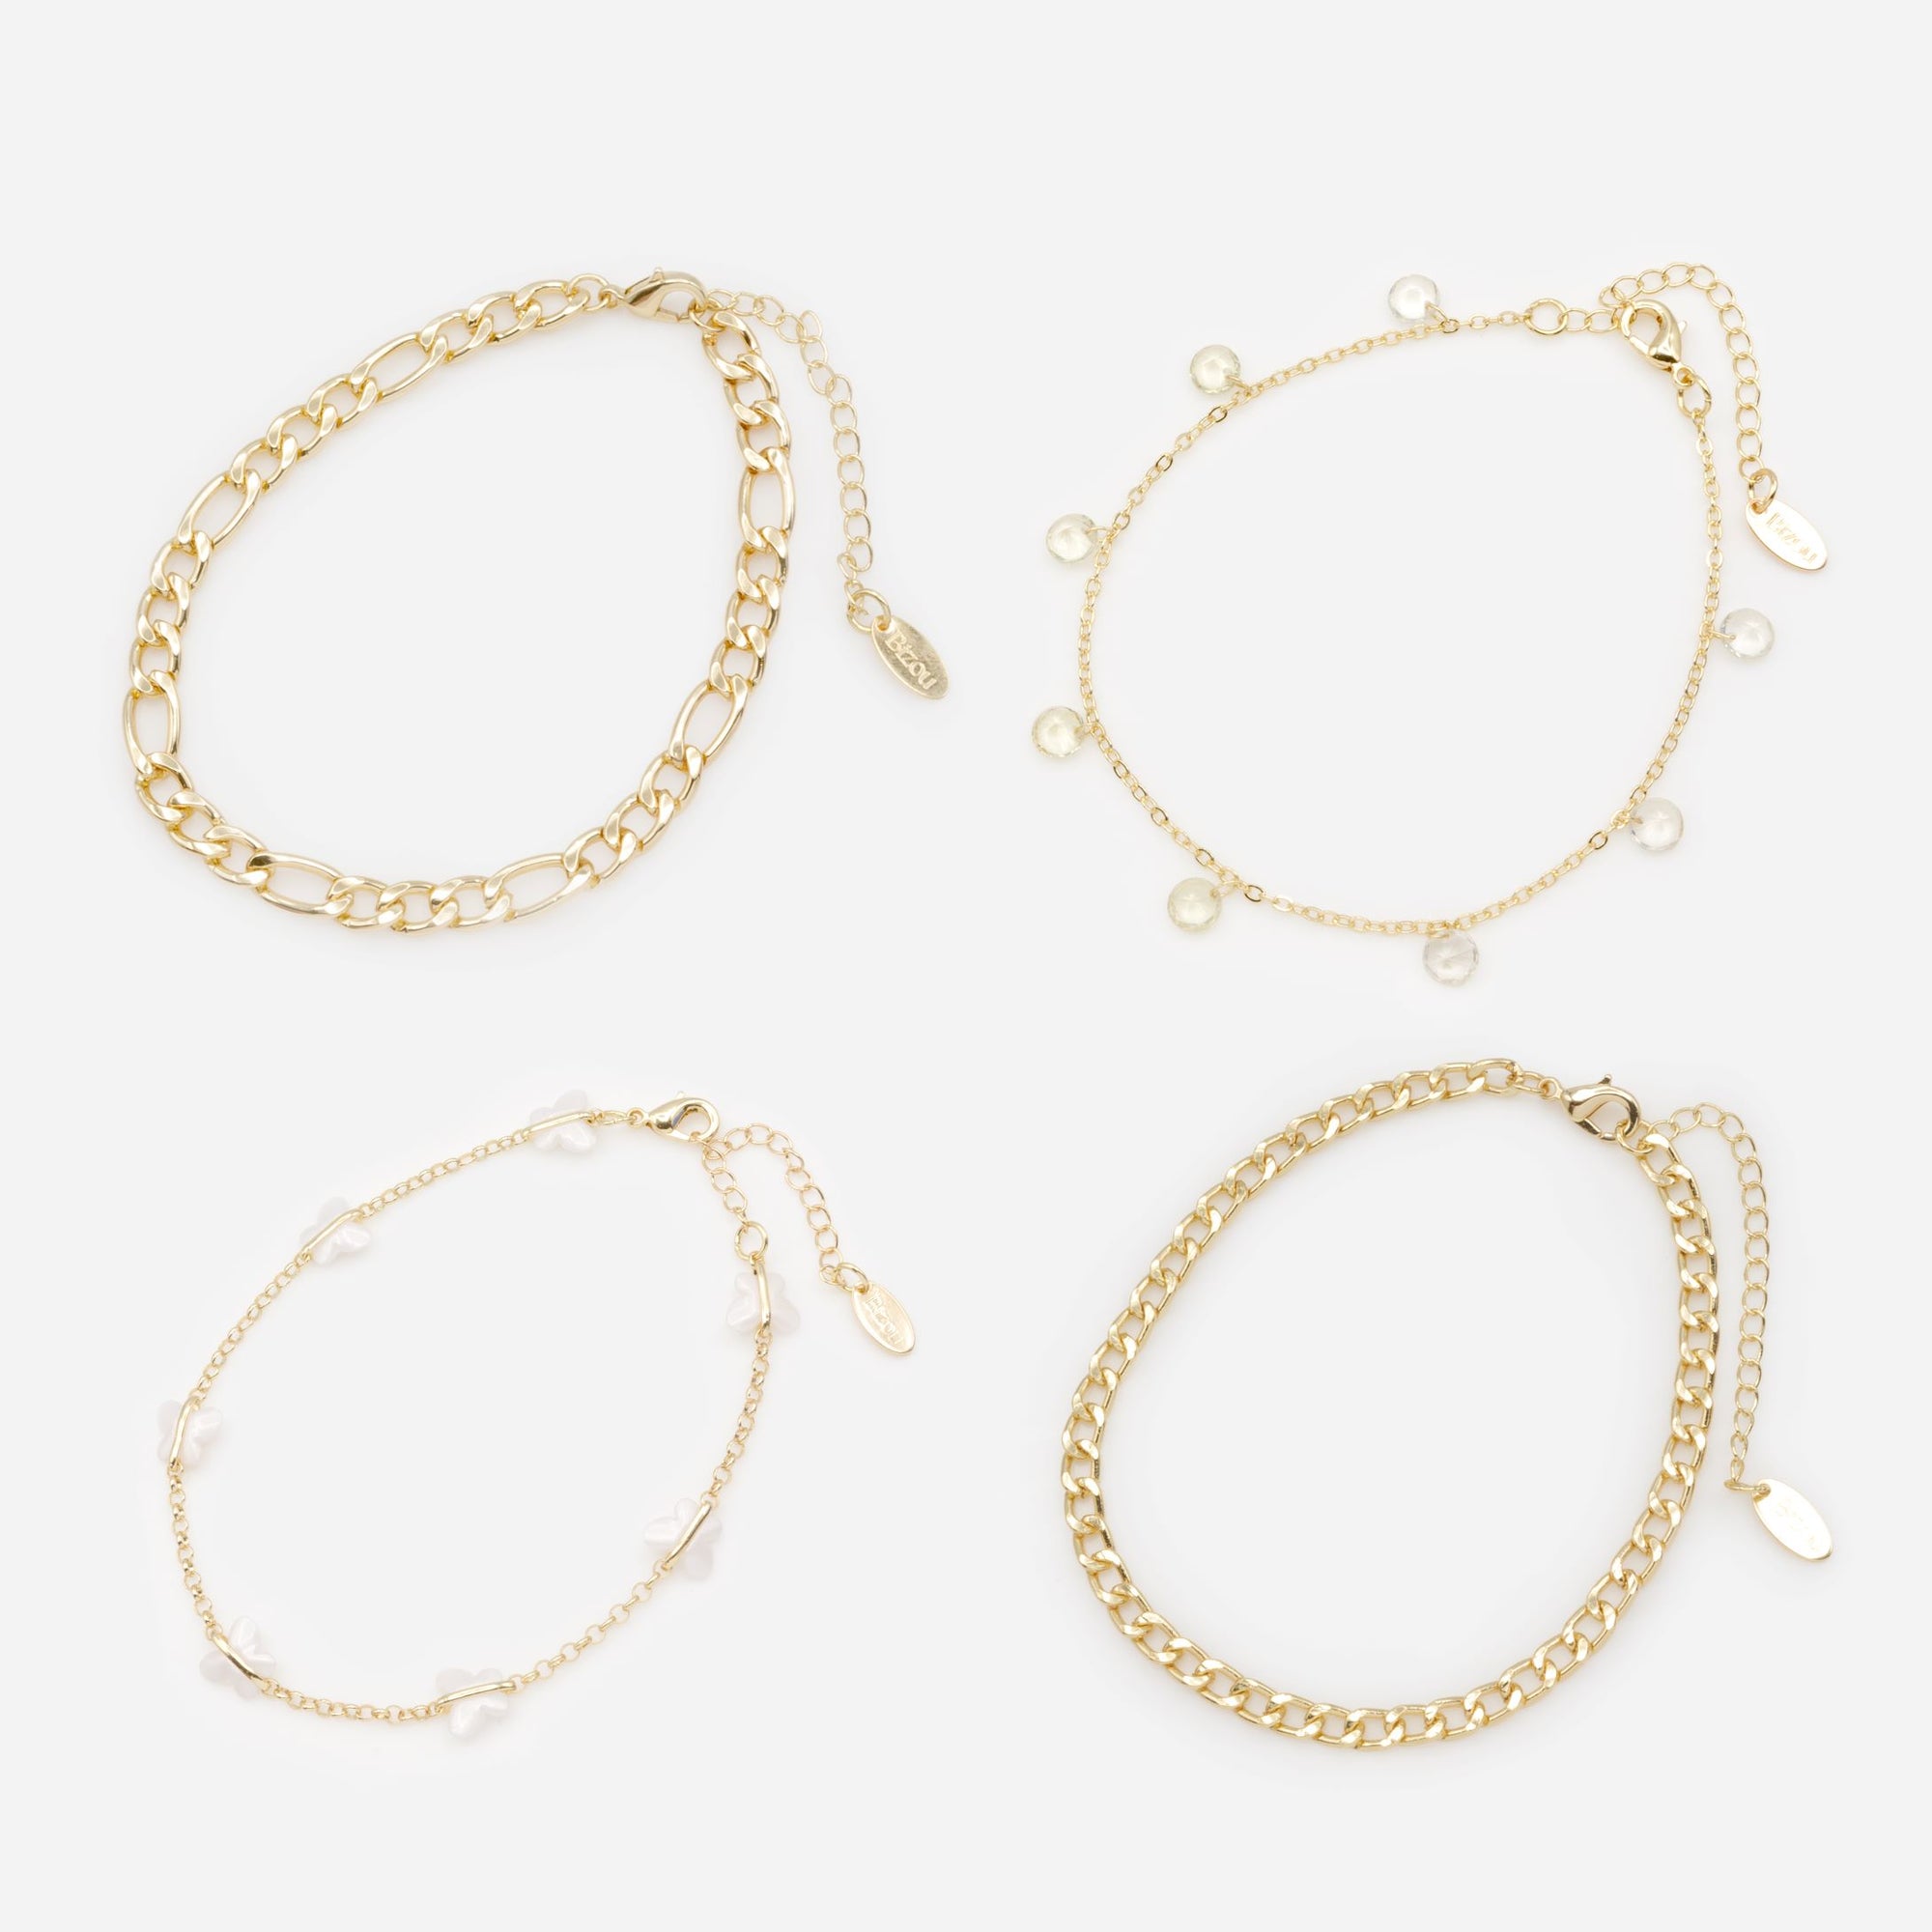 Set of four gold anklets with white butterflies